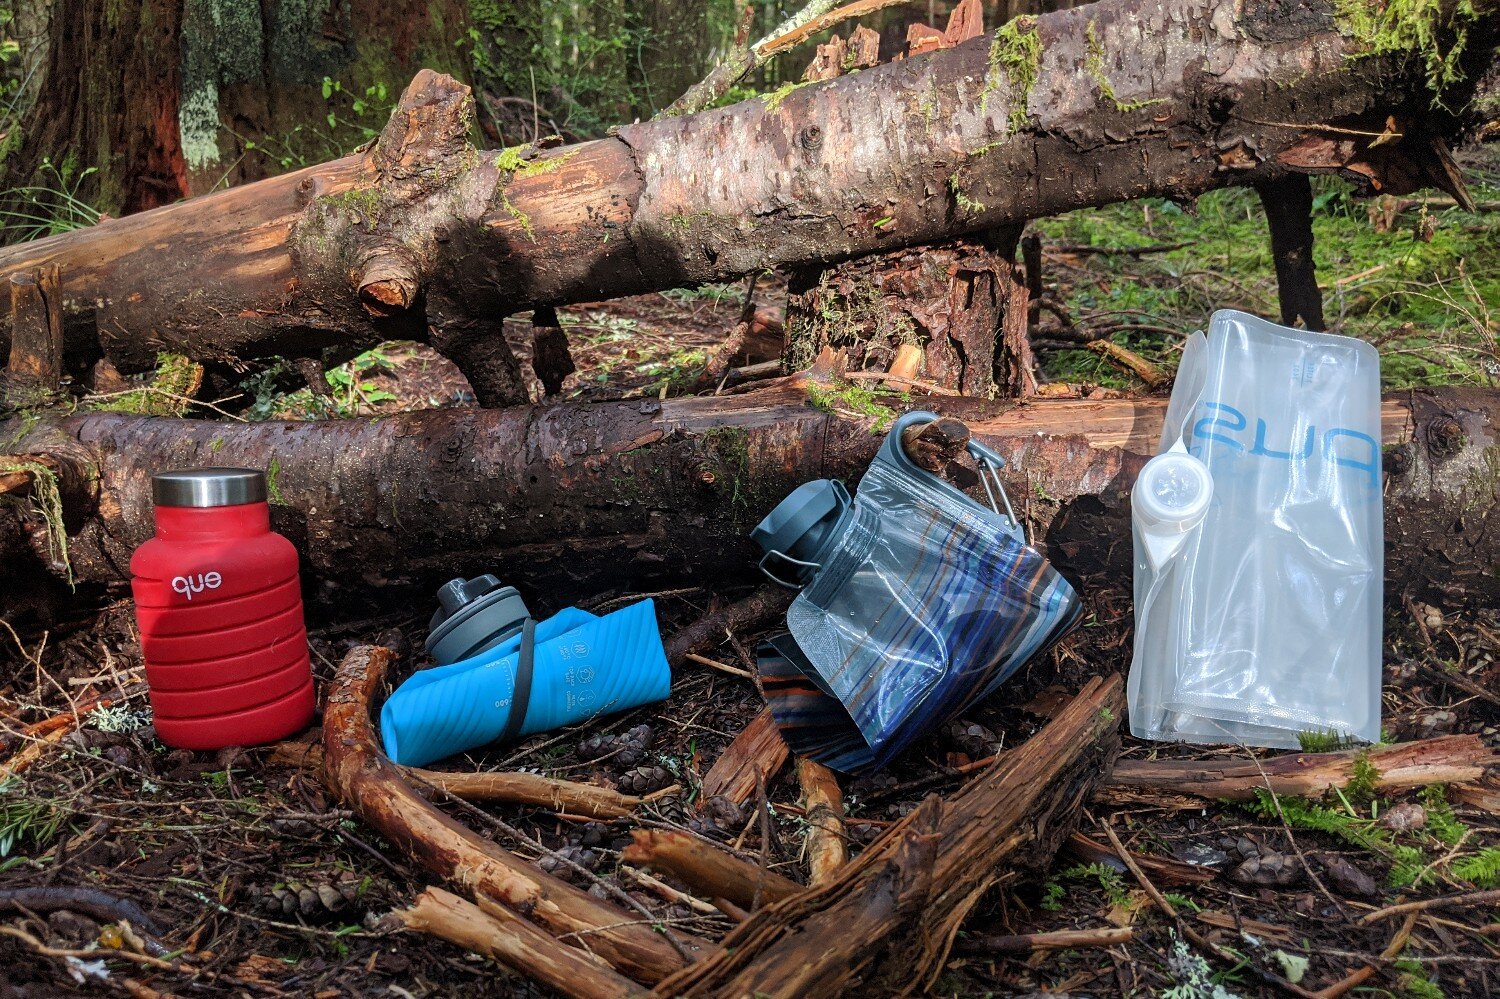 Comparing the best collapsible water bottles (from left to right): Que Collapsible Bottle, Hydrapak Flux, Platypus Softbottle with DuoLock Cap, and Platypus Platy Bottle.